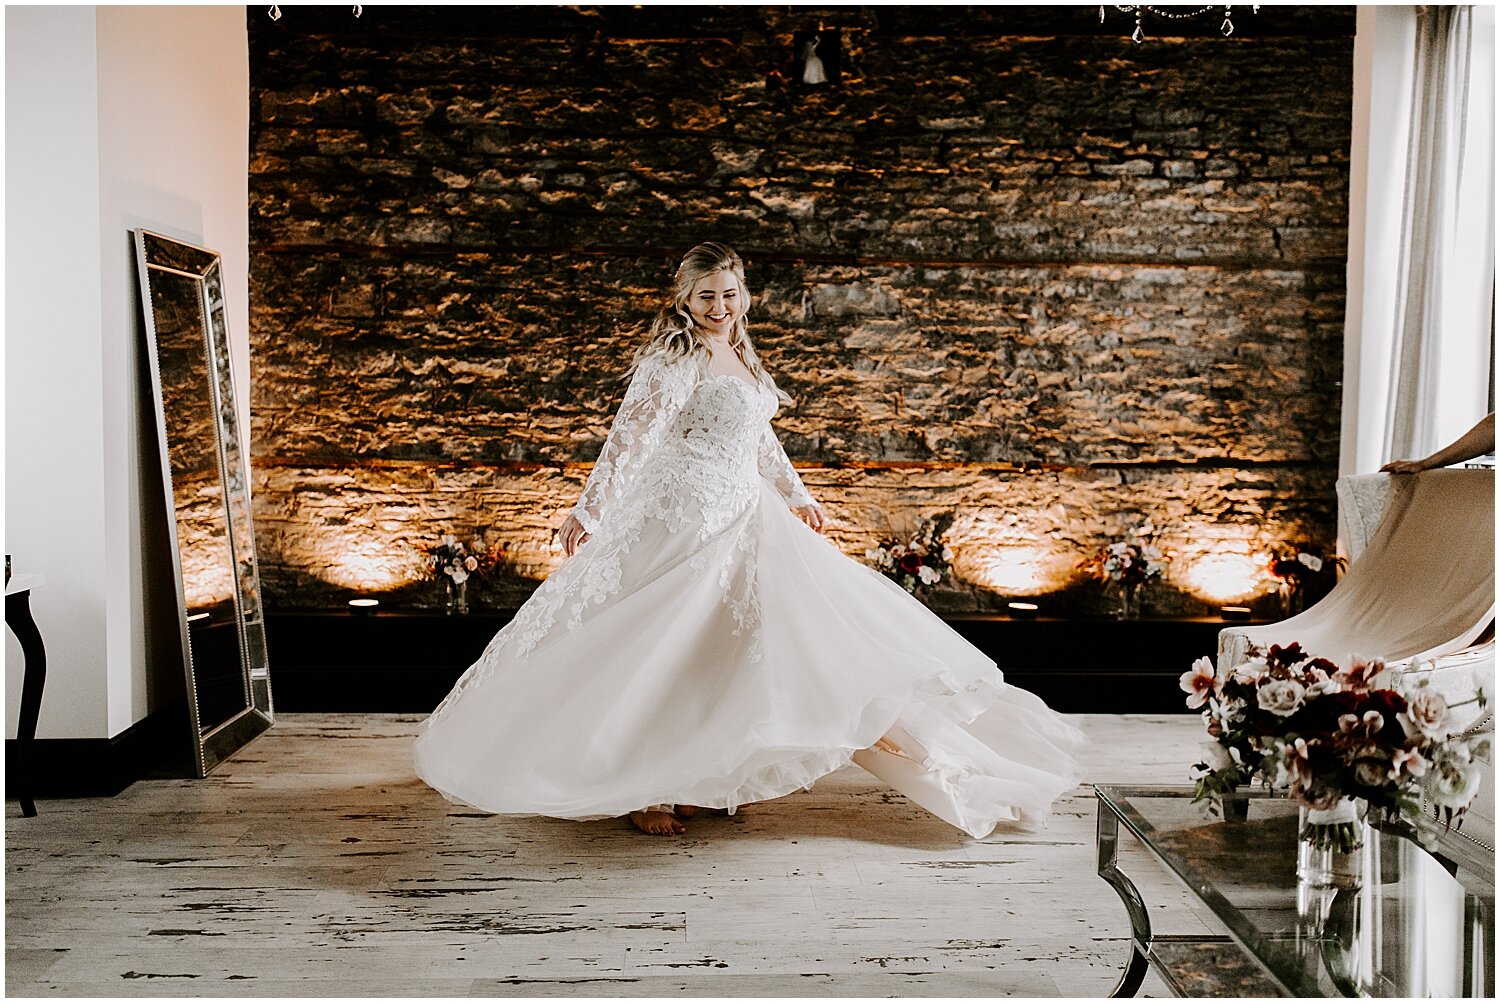  bride twirling while wearing her wedding dress 